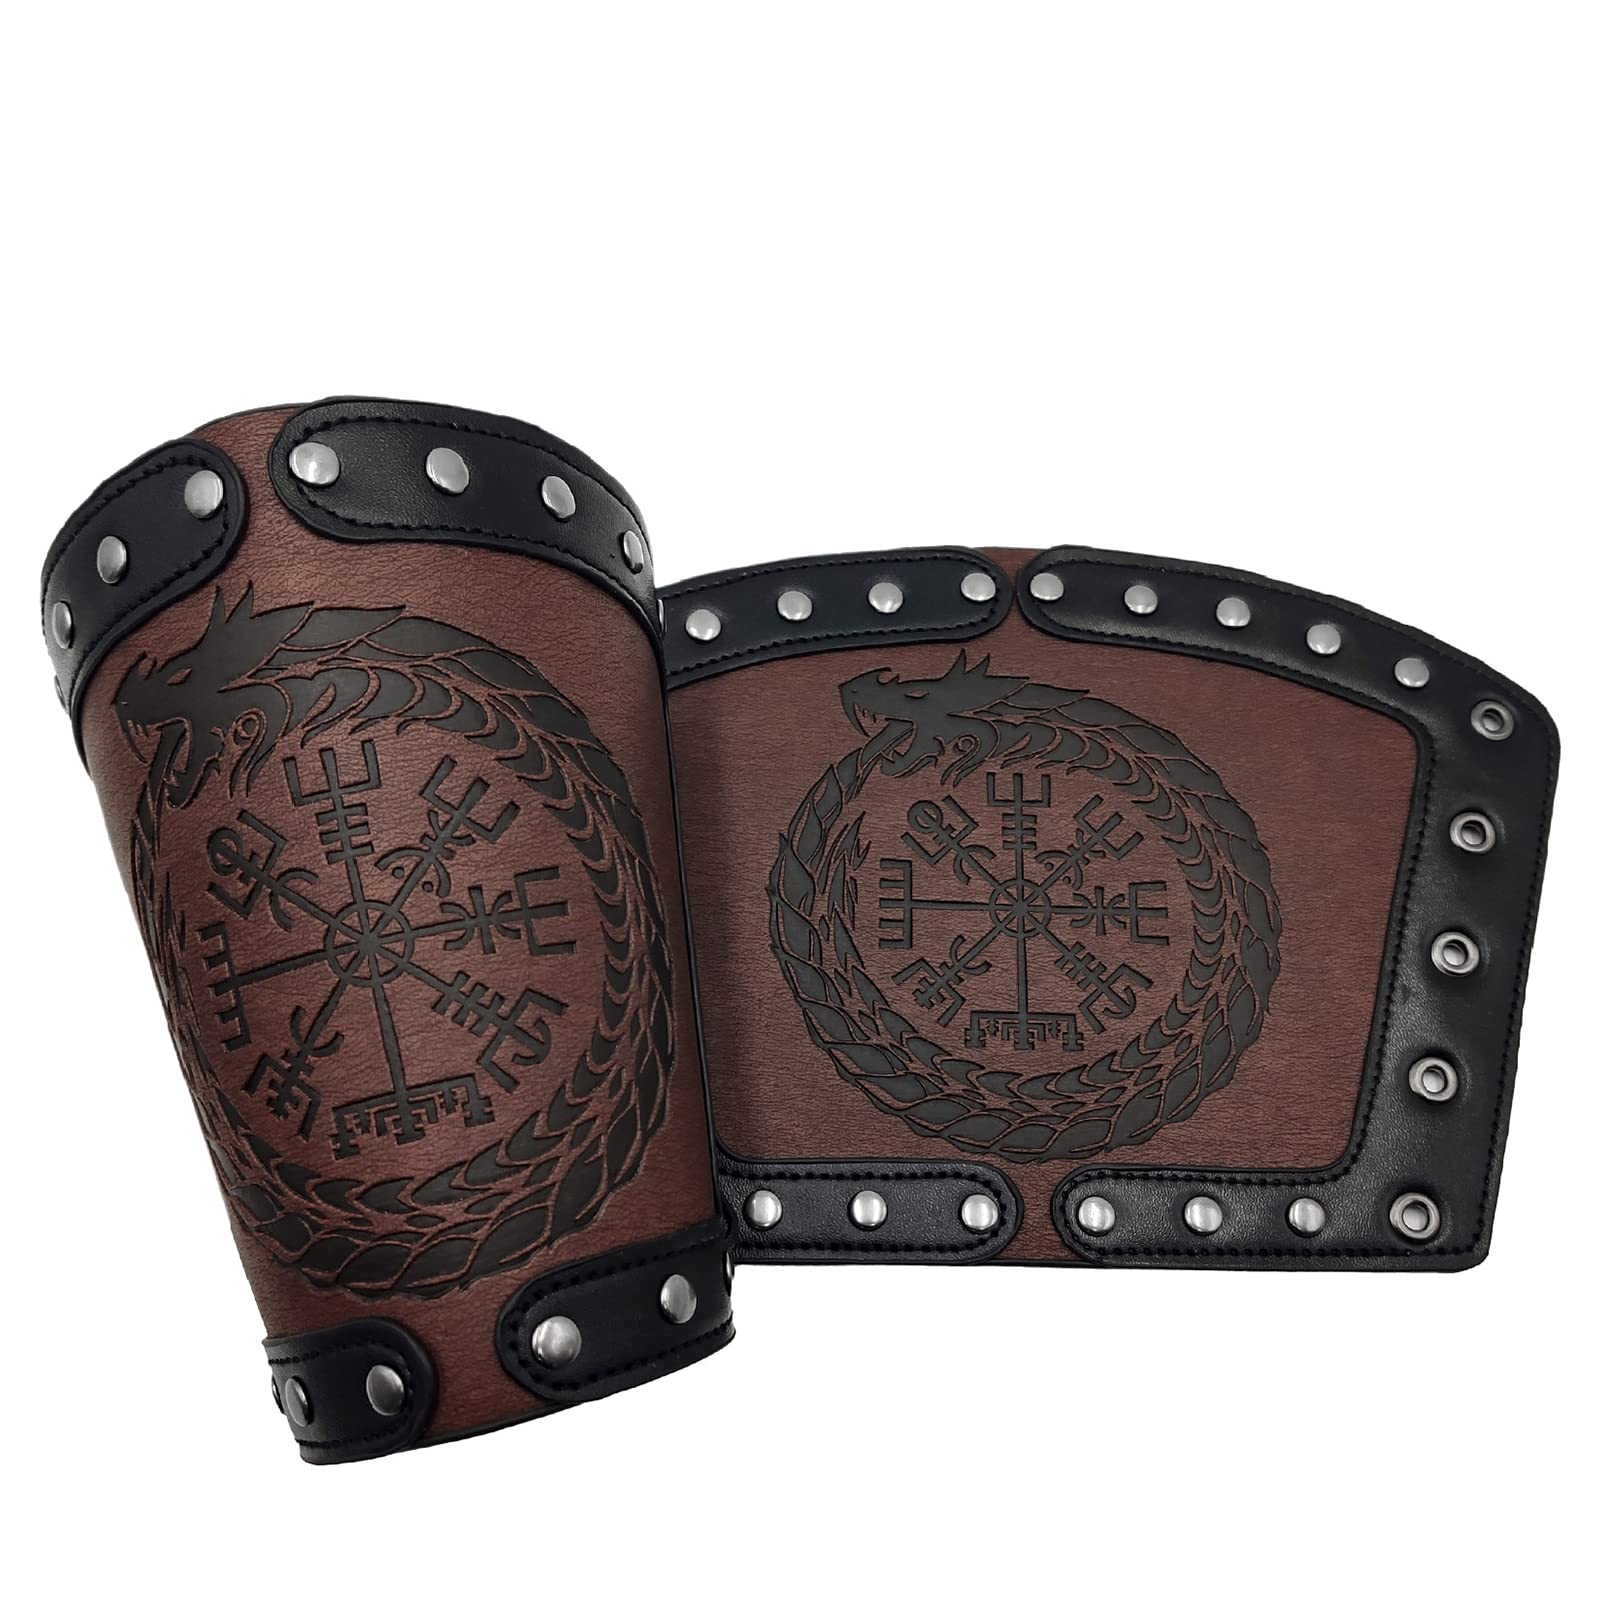 2PCS Viking Bracers Leather Gauntlet Wristband Celtic Knot Arm Armor Guards  Tree of Life Medieval Archery Unisex Leather Cuffs Armband for Men Women  Cosplay Costume(Black) 